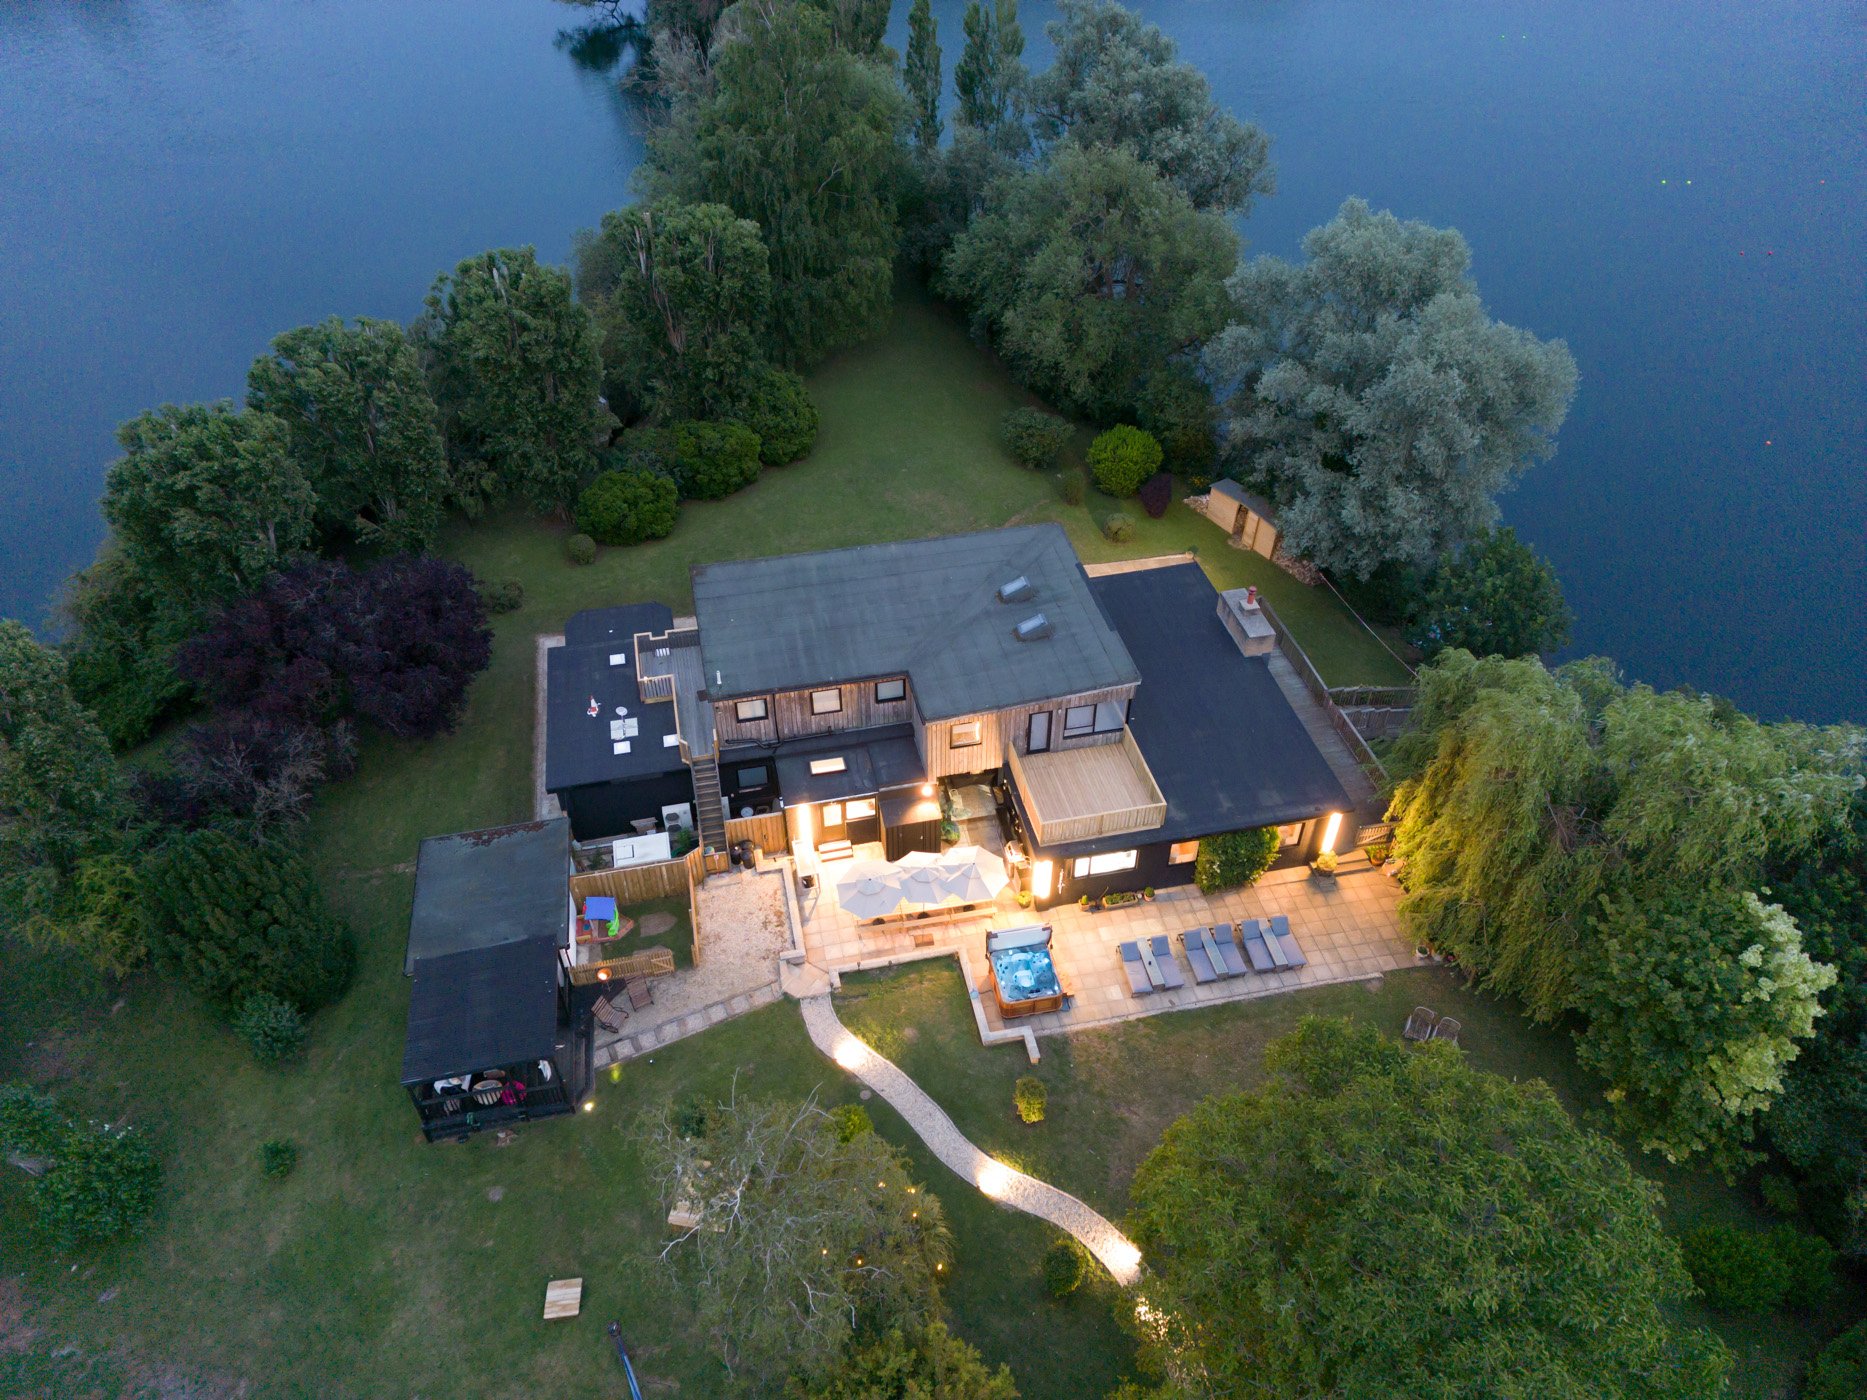 The Island - accommodation from above